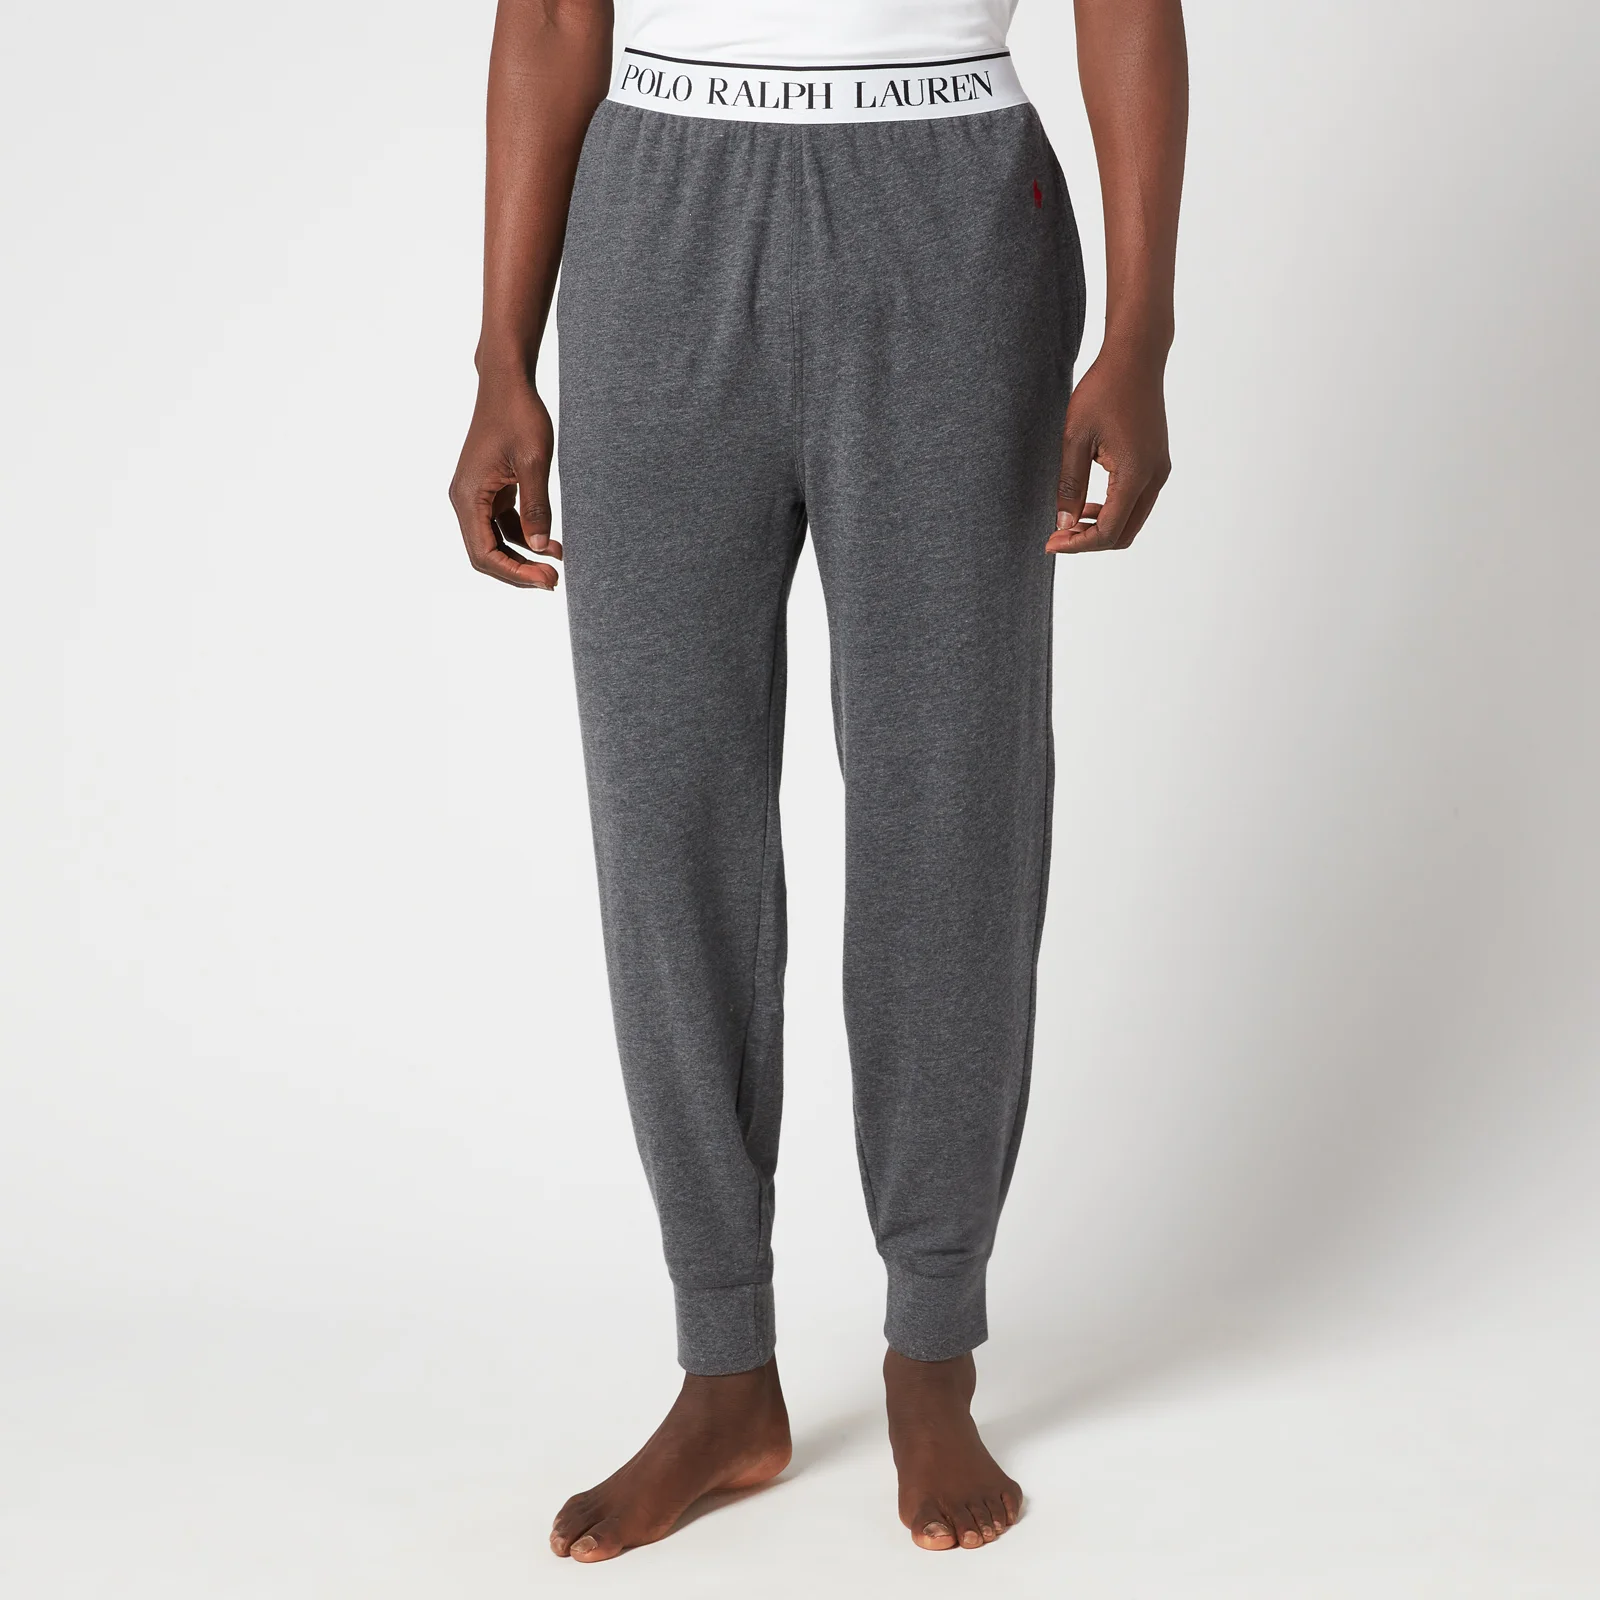 Polo Ralph Lauren Men's Cuffed Joggers - Charcoal Heather Image 1